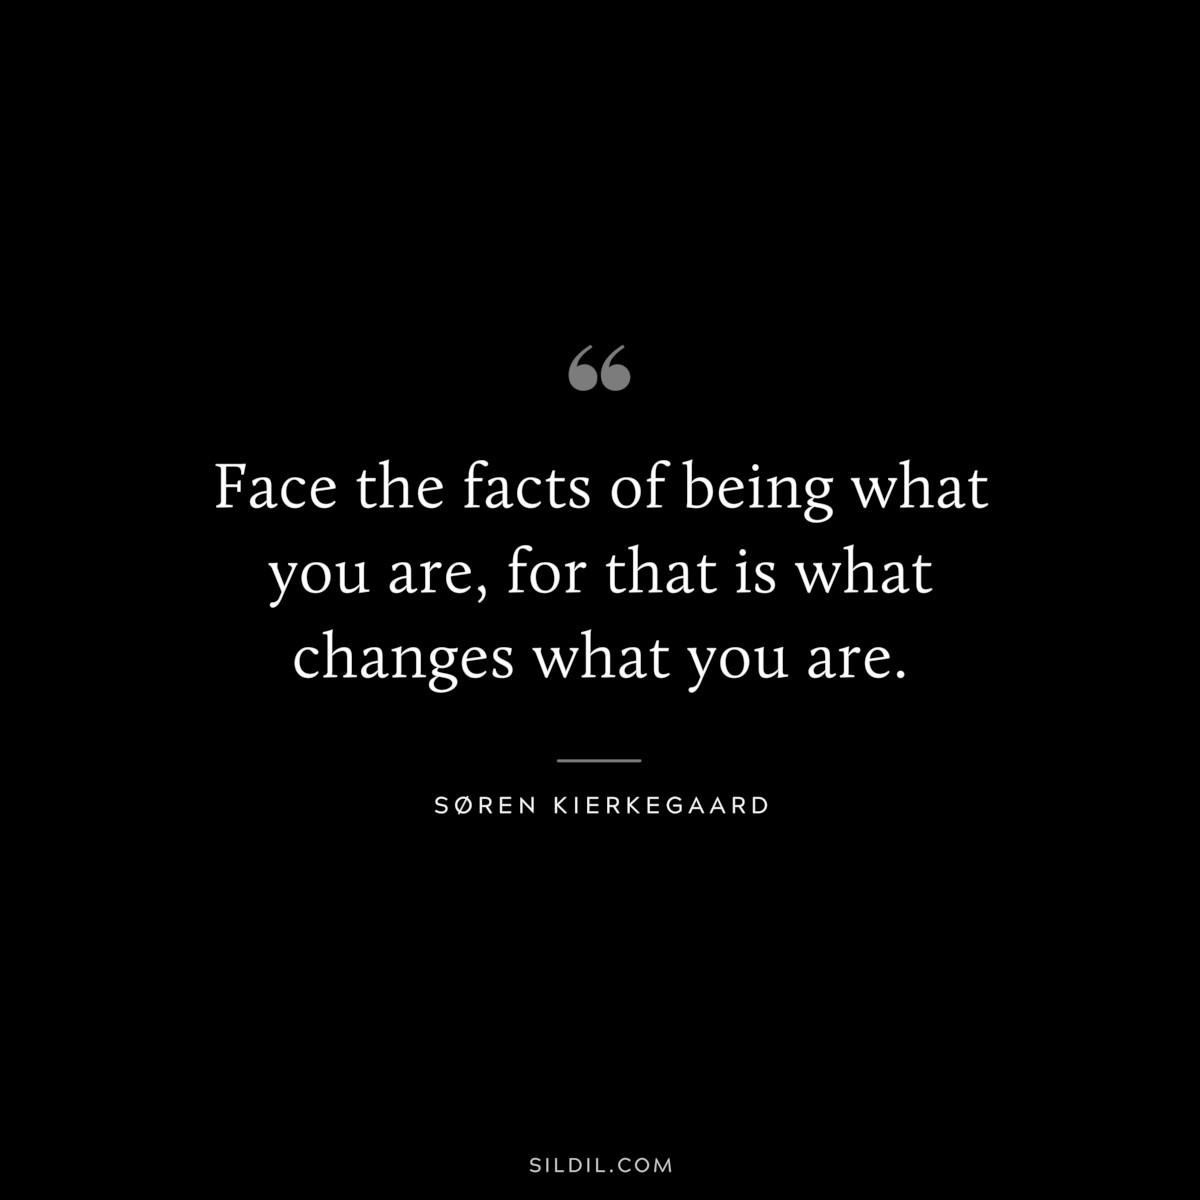 Face the facts of being what you are, for that is what changes what you are. ― Søren Kierkegaard